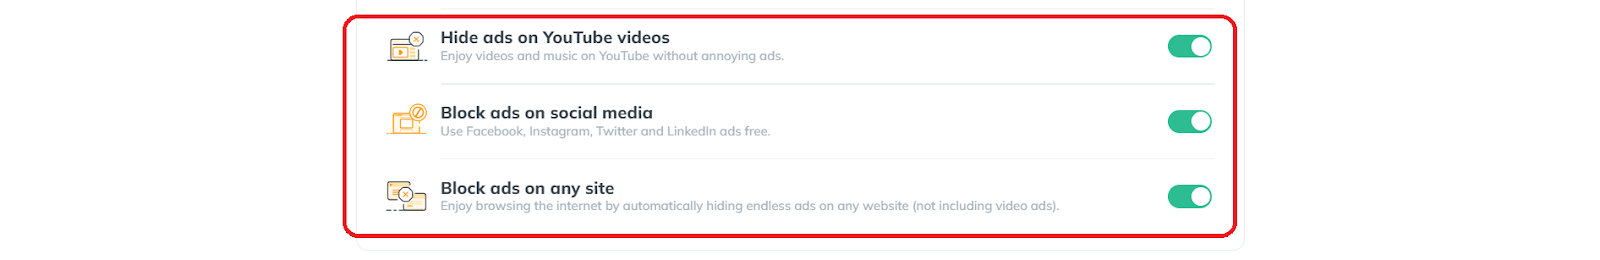 Hide ads on YouTube, social media and any site